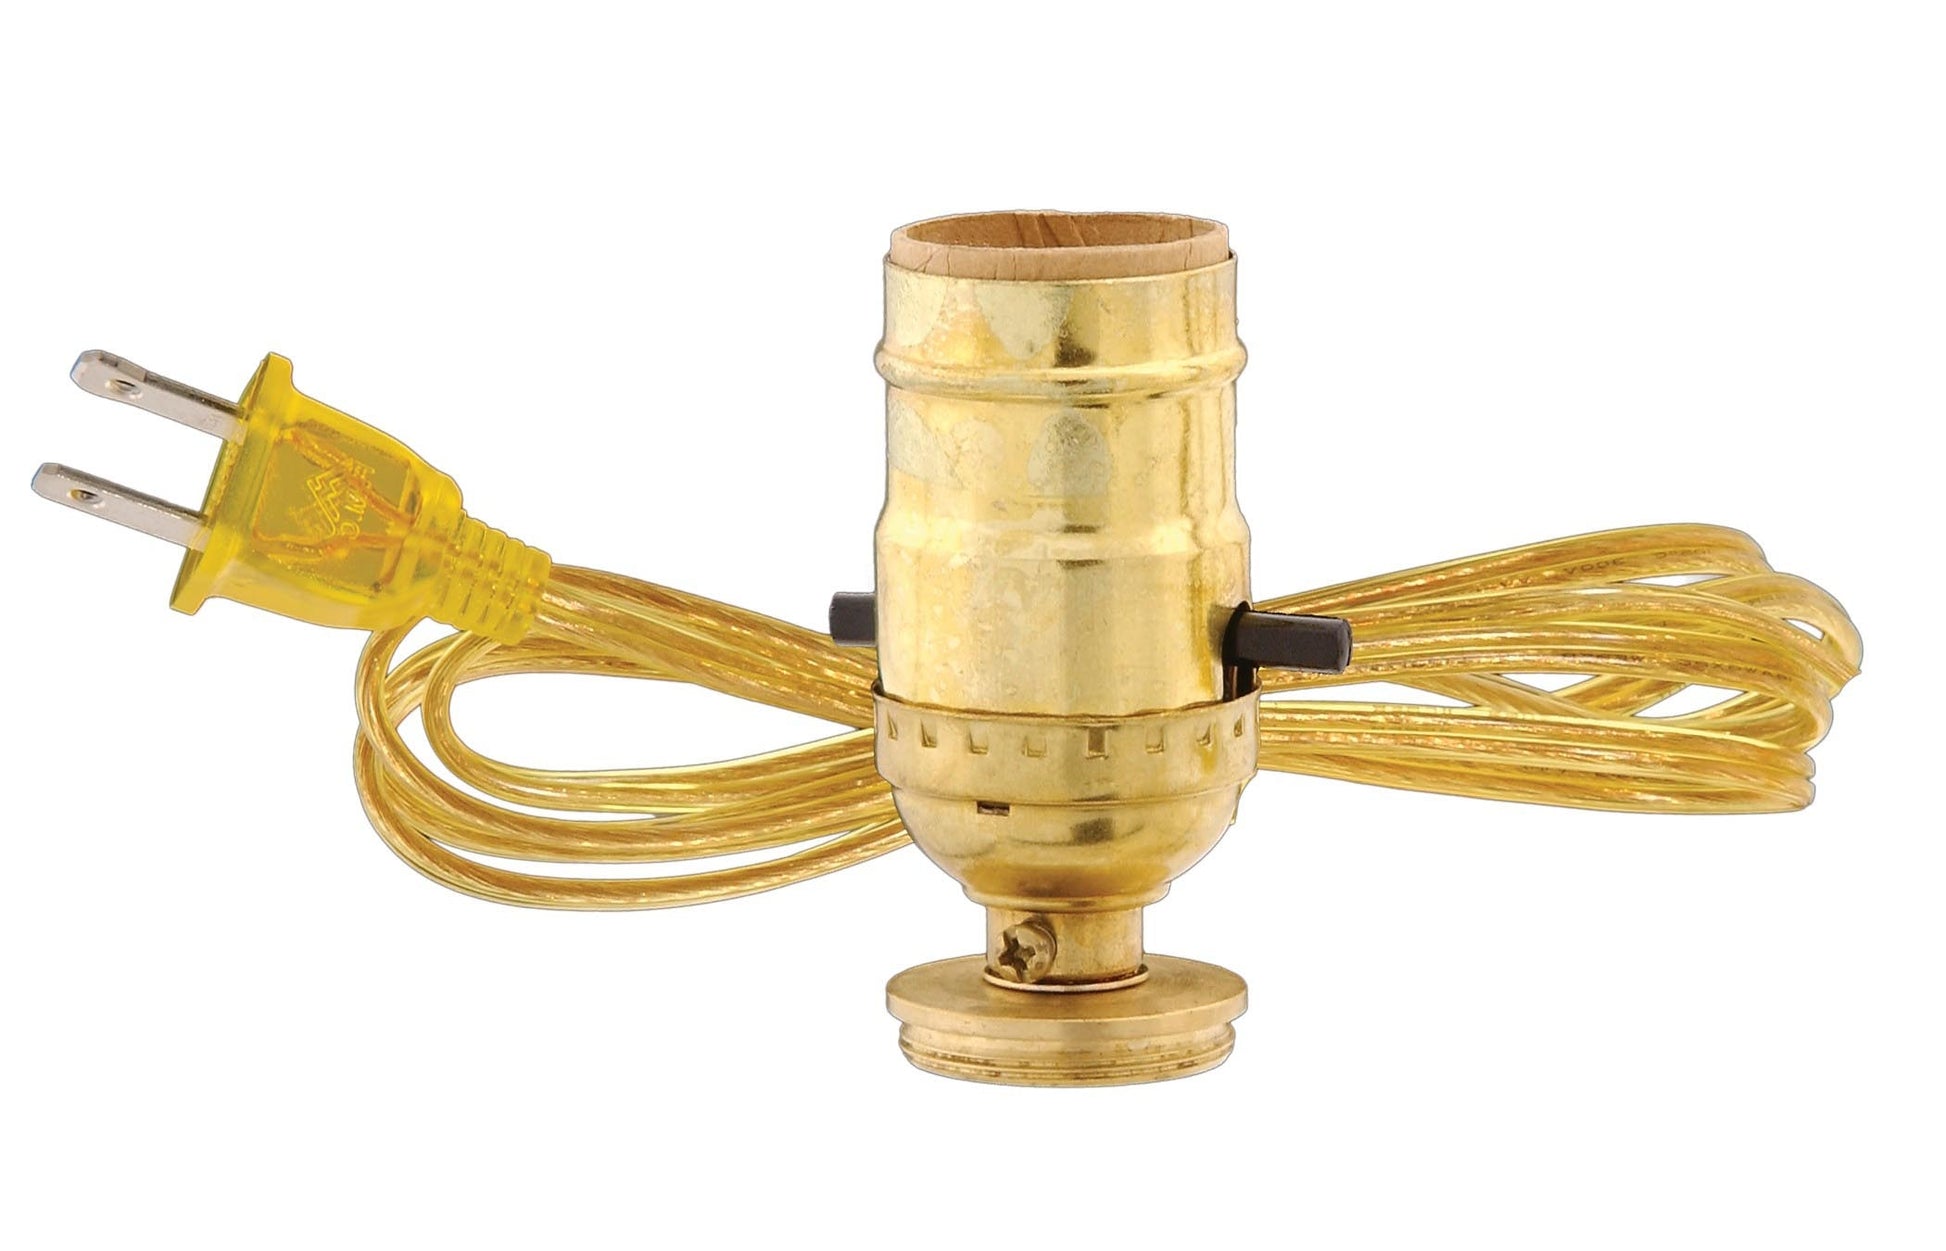 Electric Adaptor For Oil Lamps